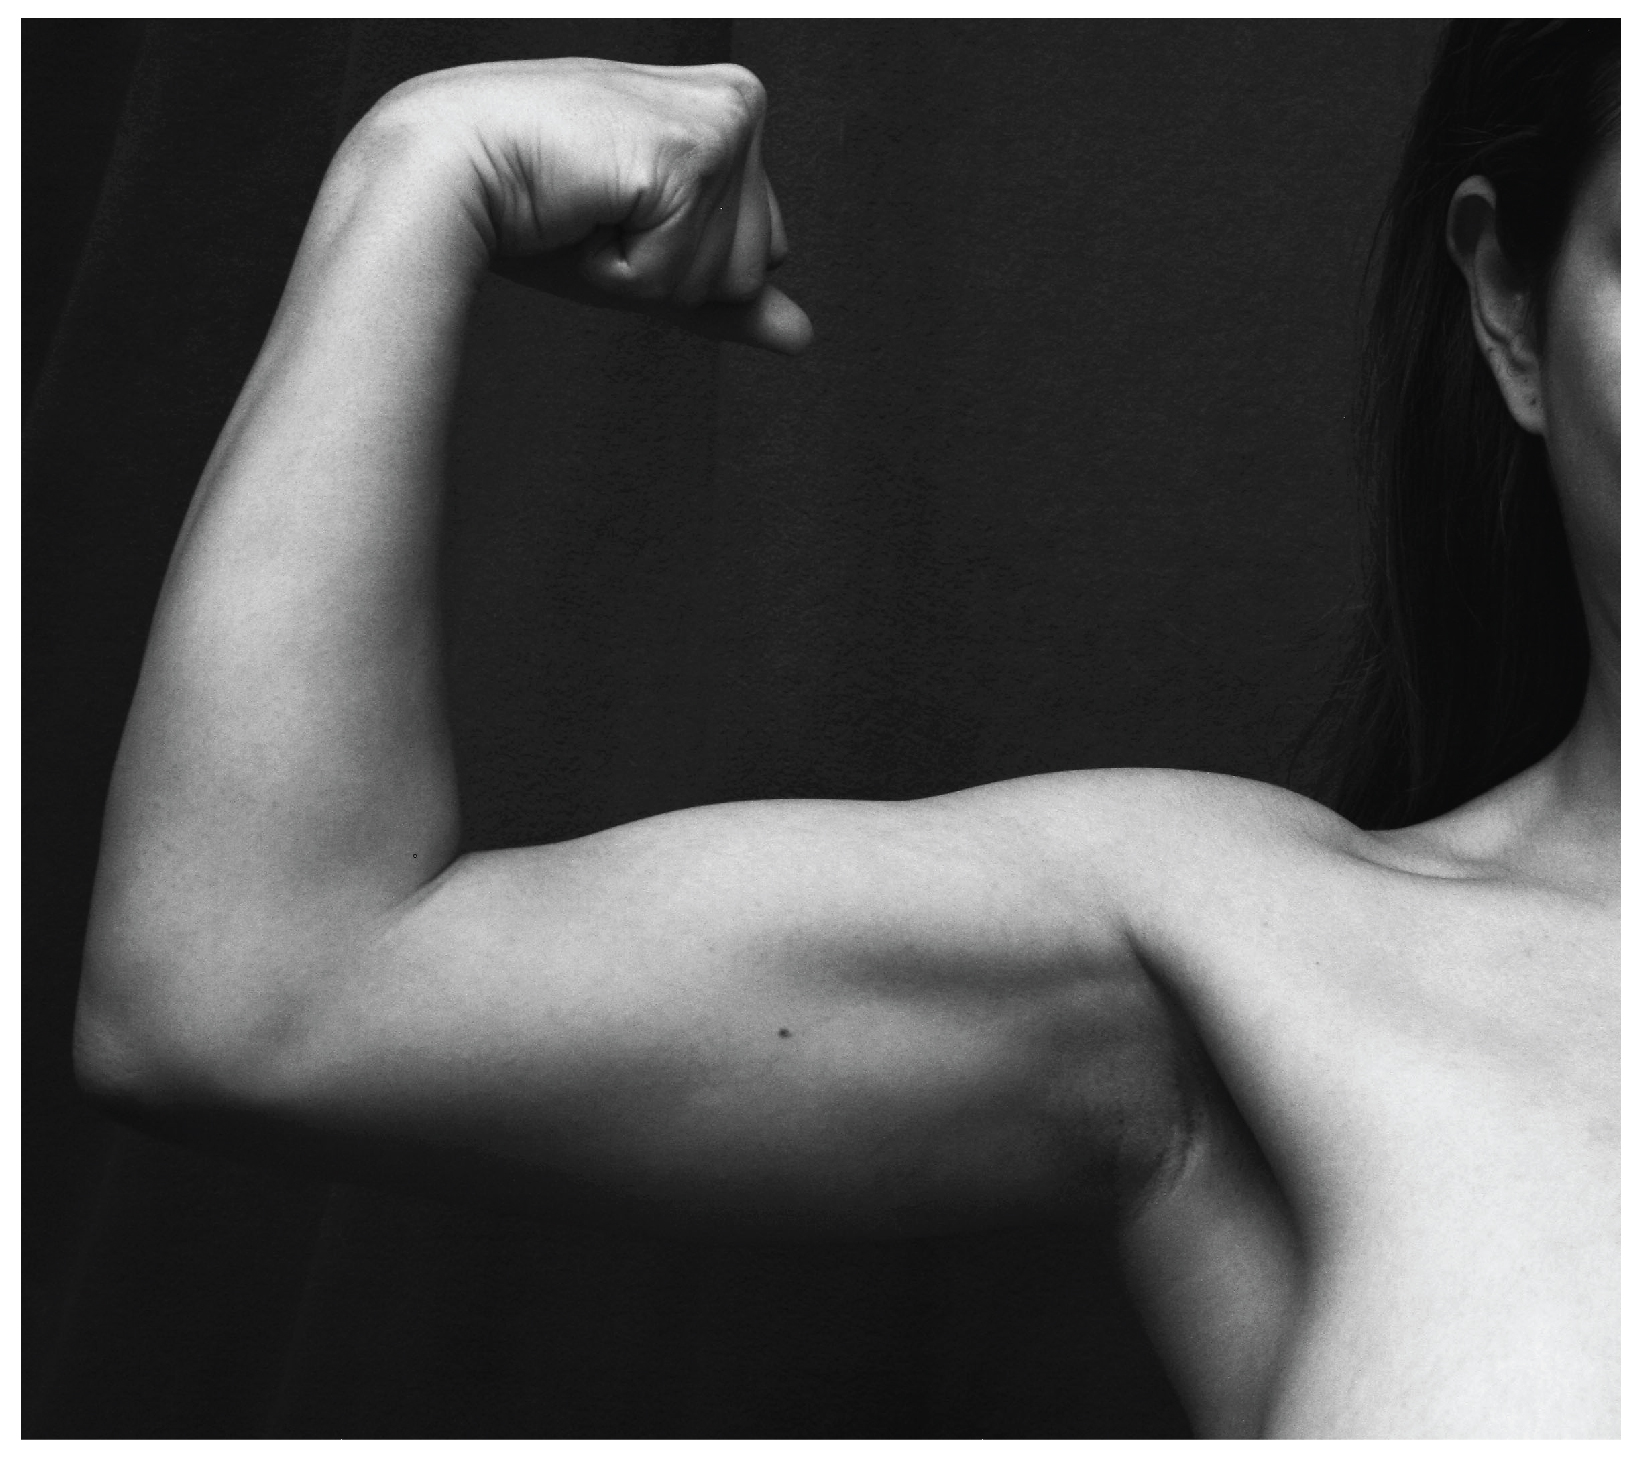 This photo shows a person flexing her biceps.